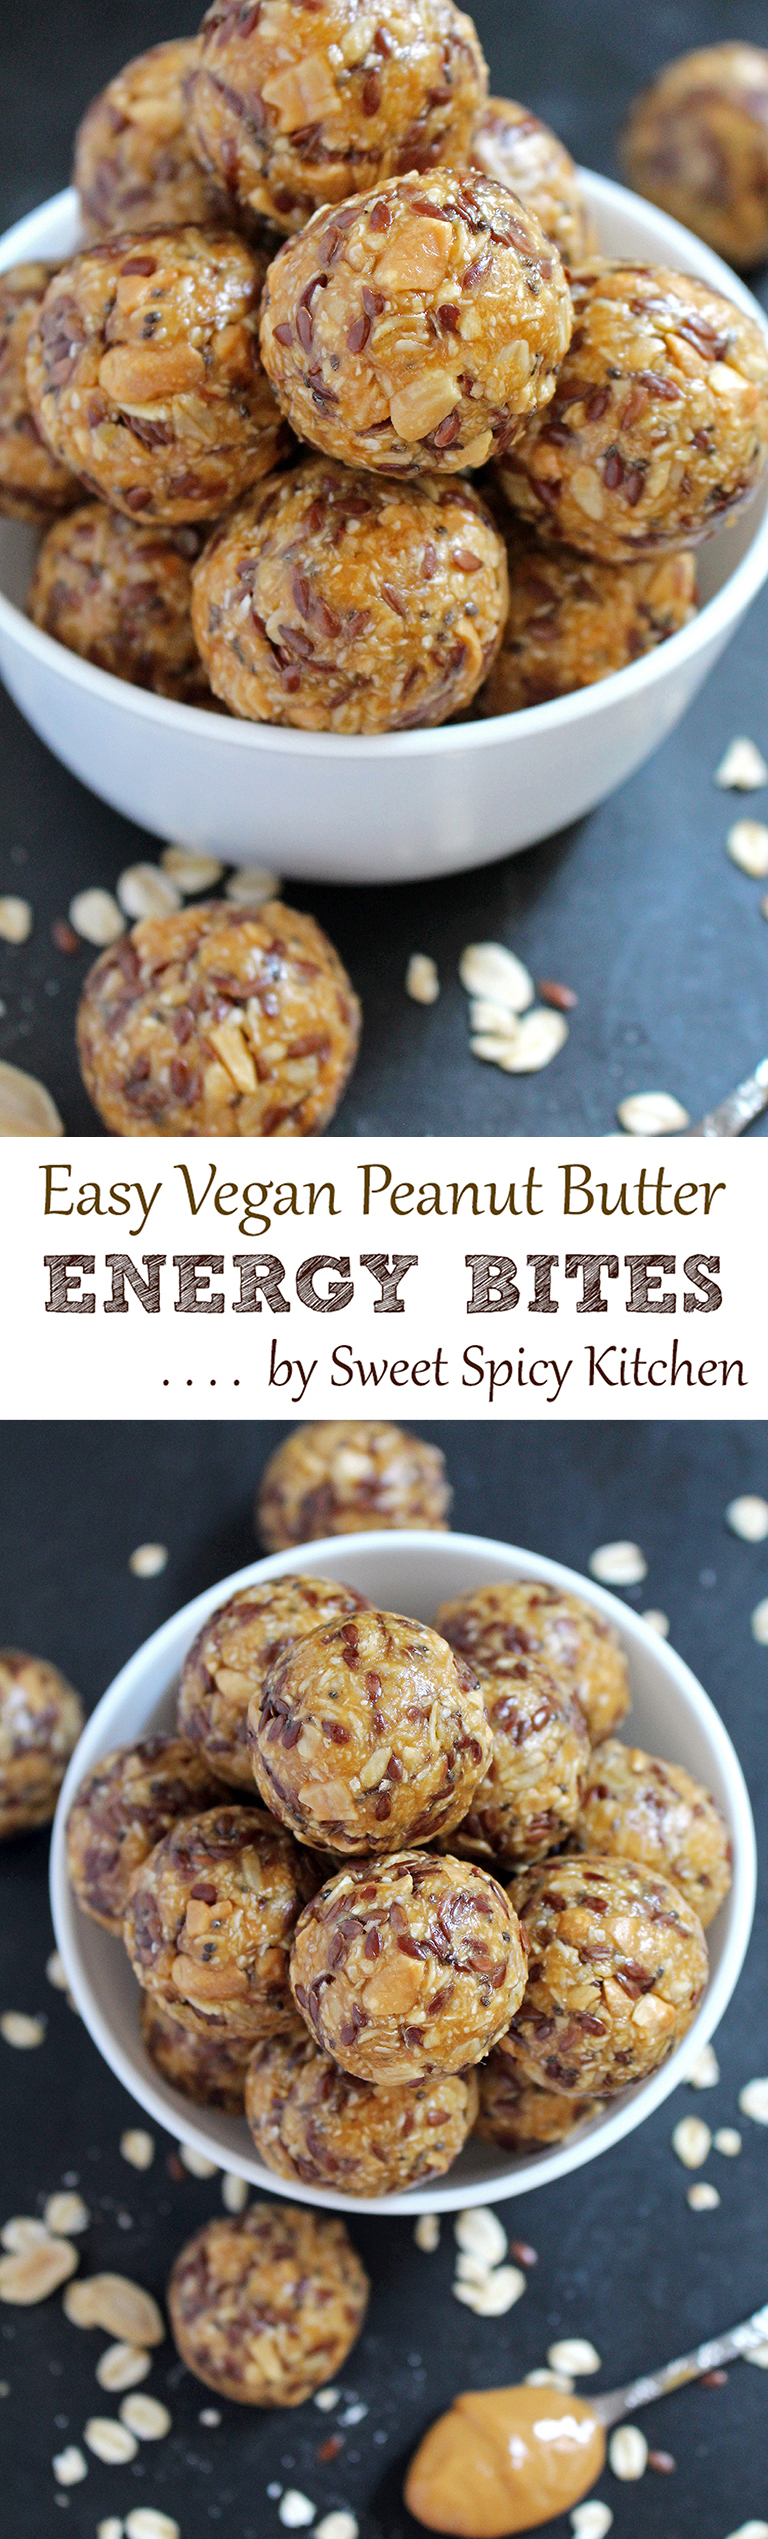 Moist and crunchy balls perfect as a brunch snack - Easy Vegan Peanut Butter Energy Bites 